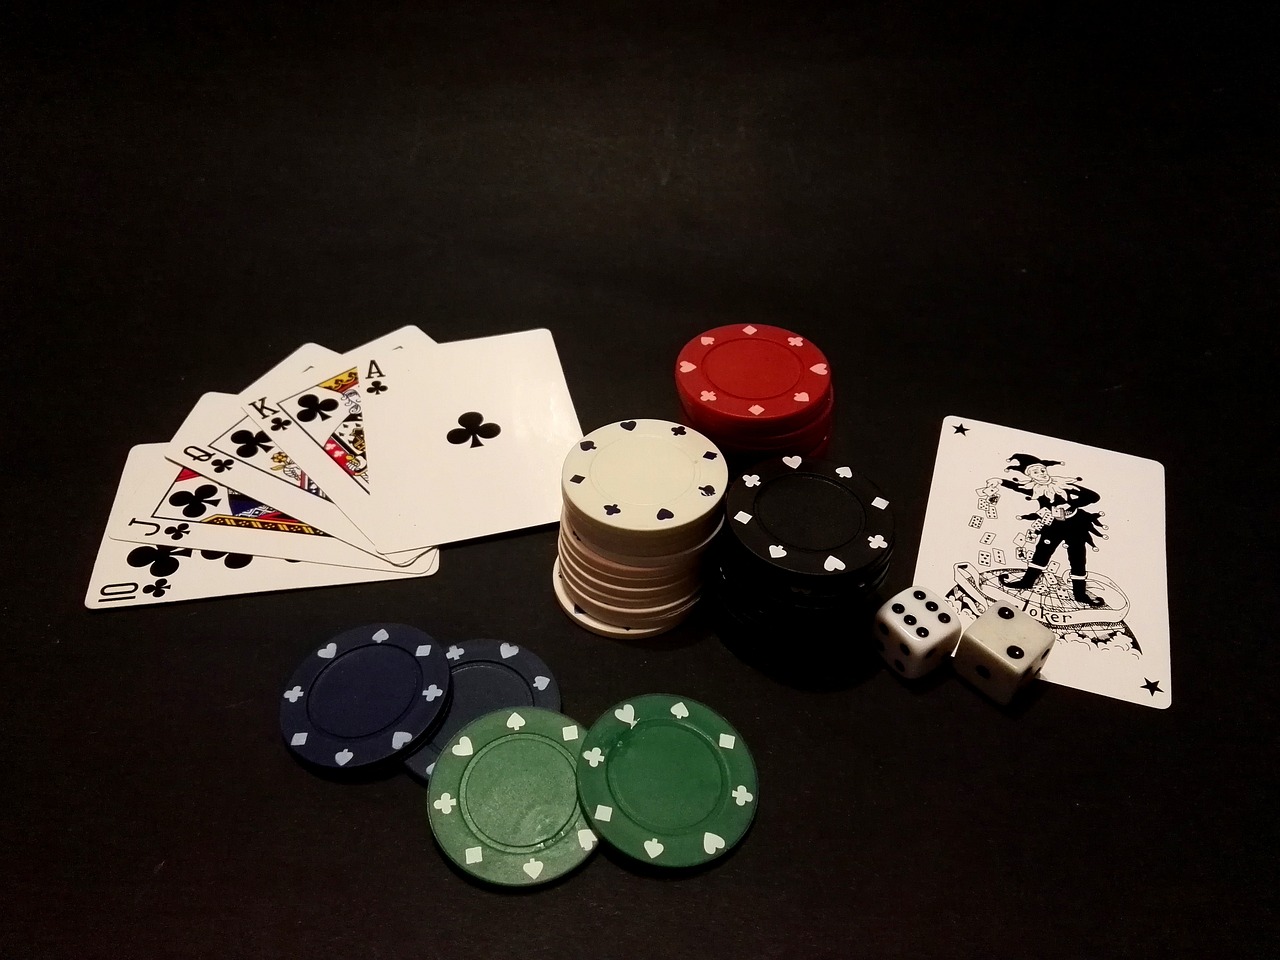 Heart-Pounding Action: Mastering Casino Card Games for Big Wins